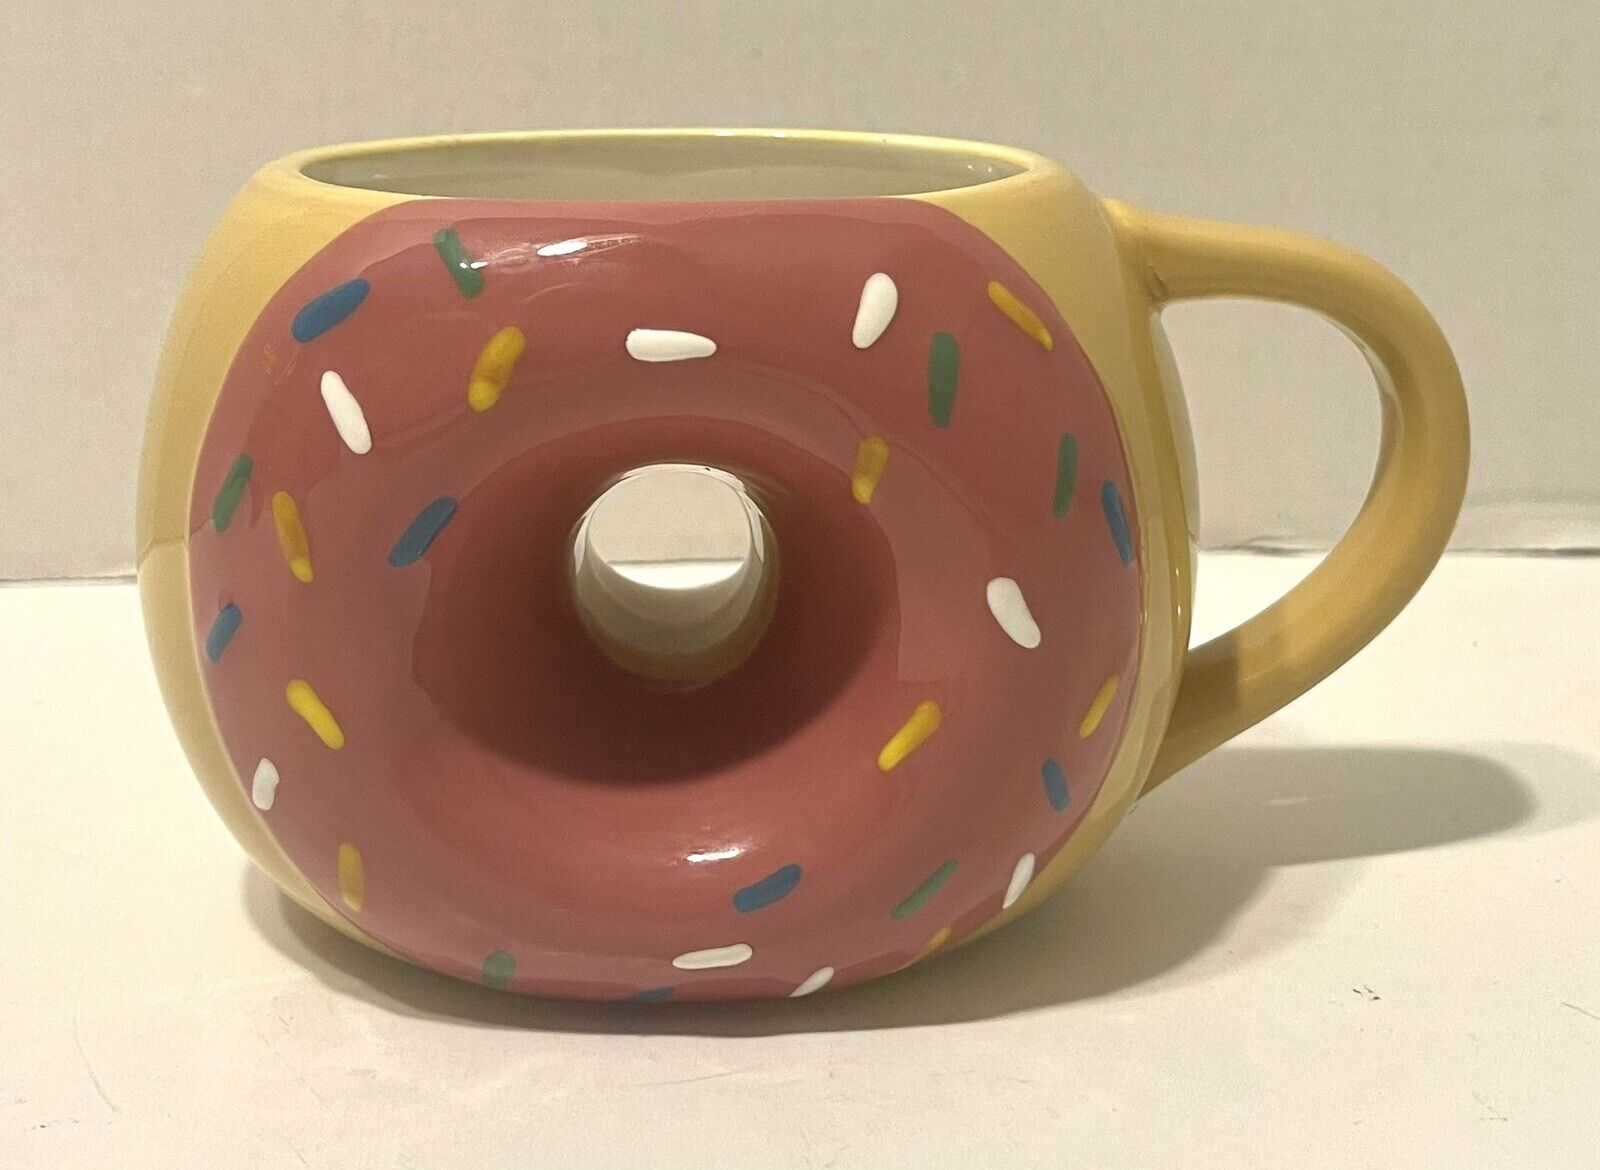 Donut Shaped Coffee Mug Cup Pink Icing With Sprinkles Yellow Donut Unique